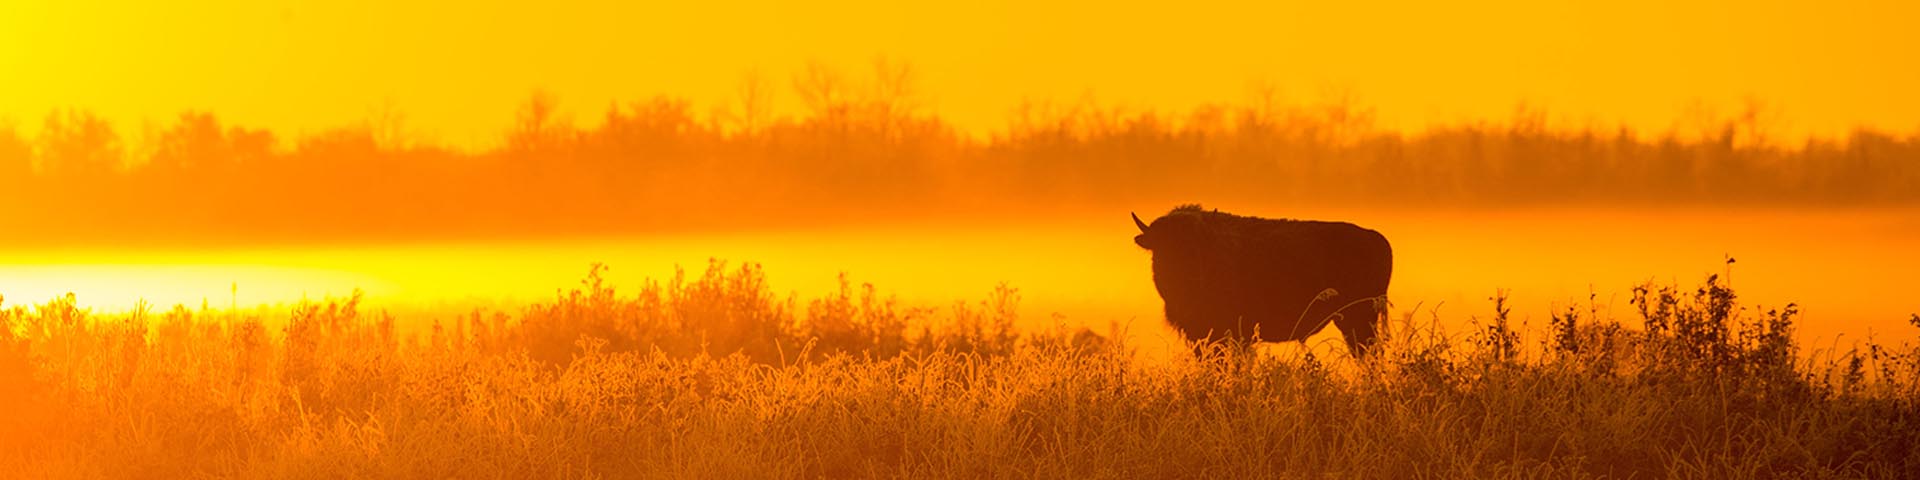 A lone bison standing in the grasslands. The sun is setting which casts an intense golden glow over the scene.